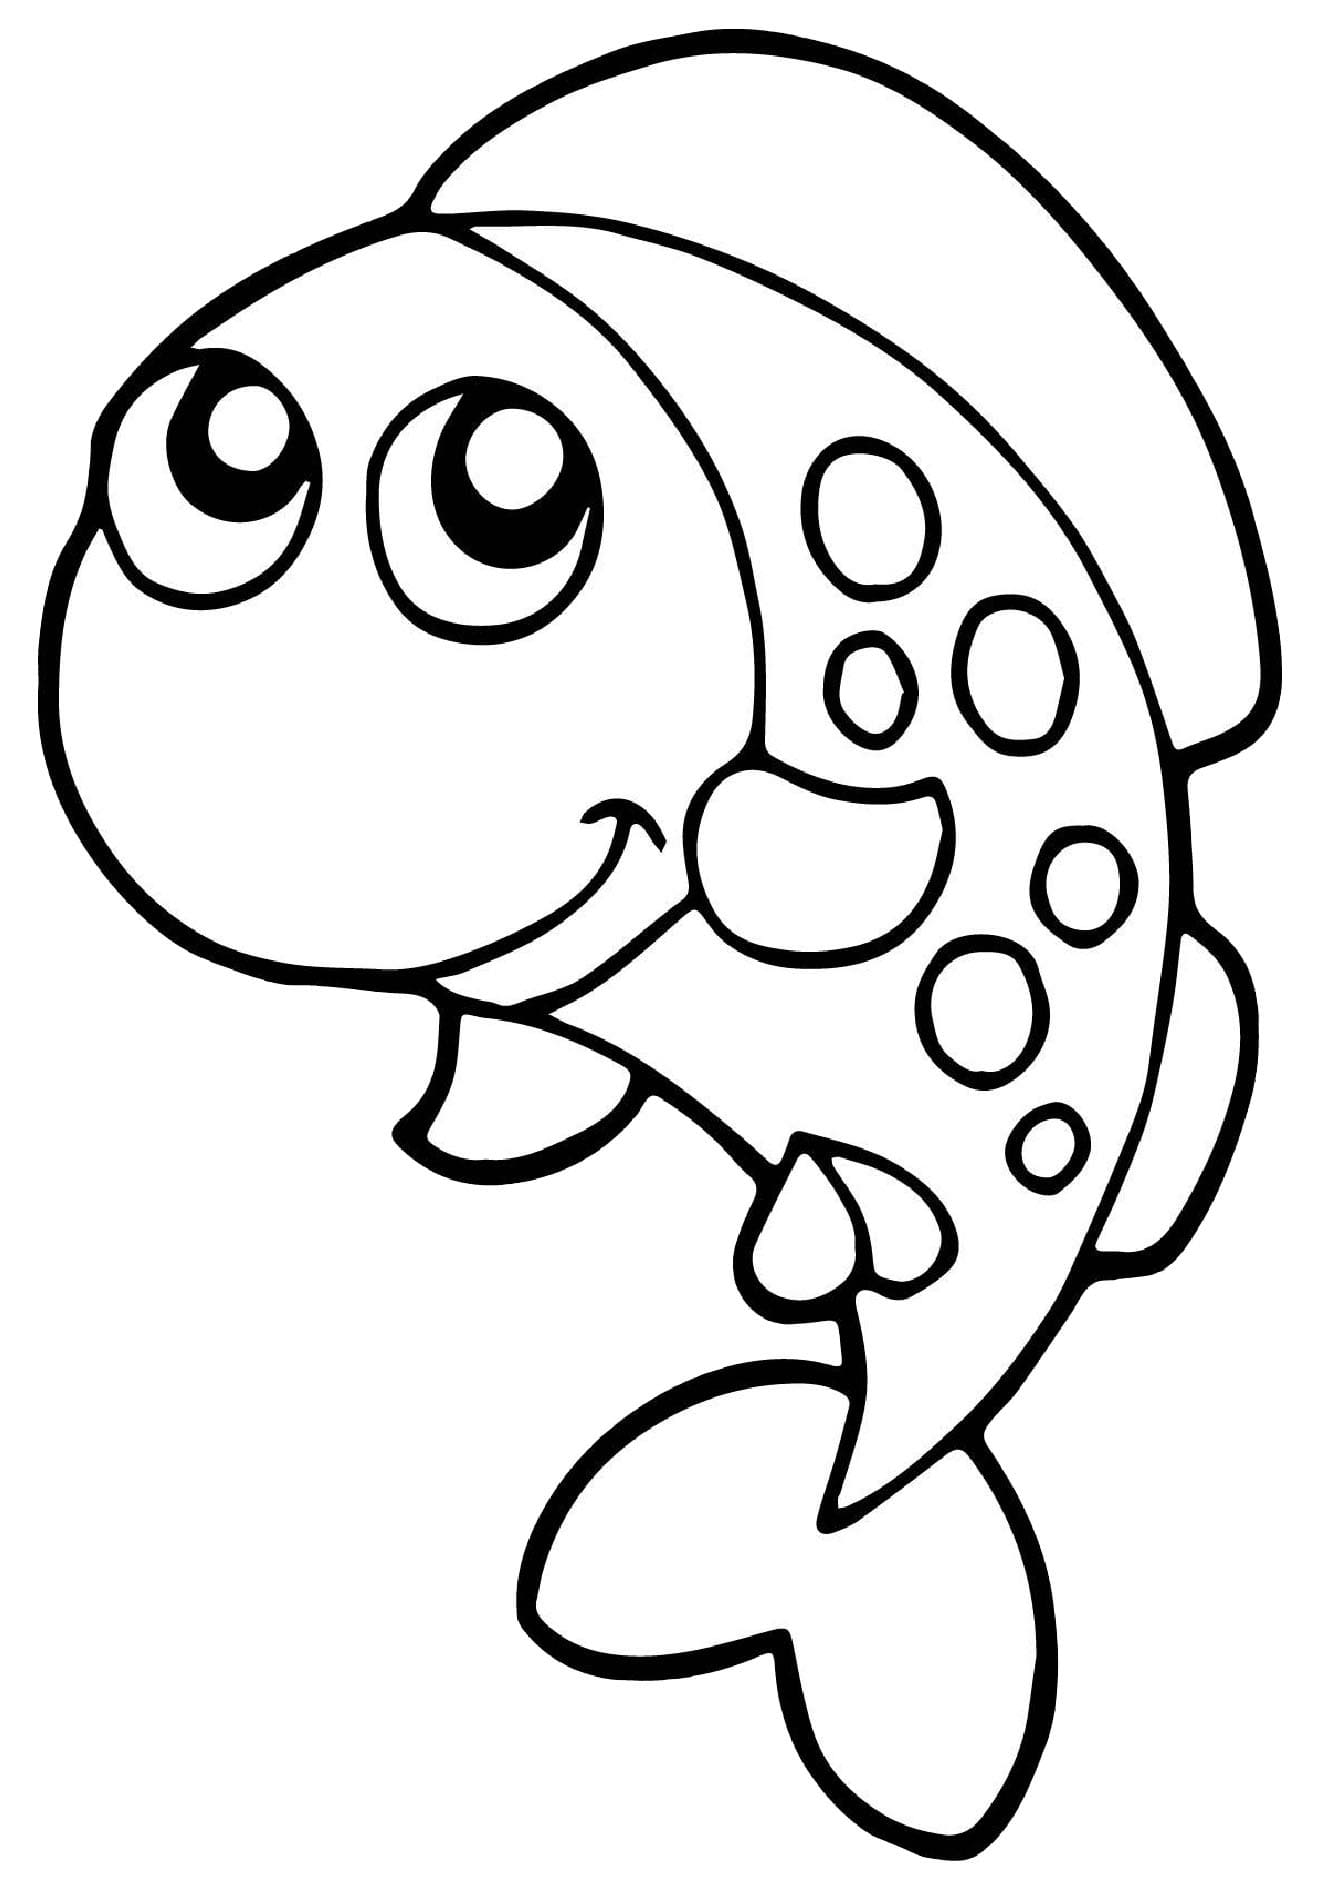 Cute fish image coloring page